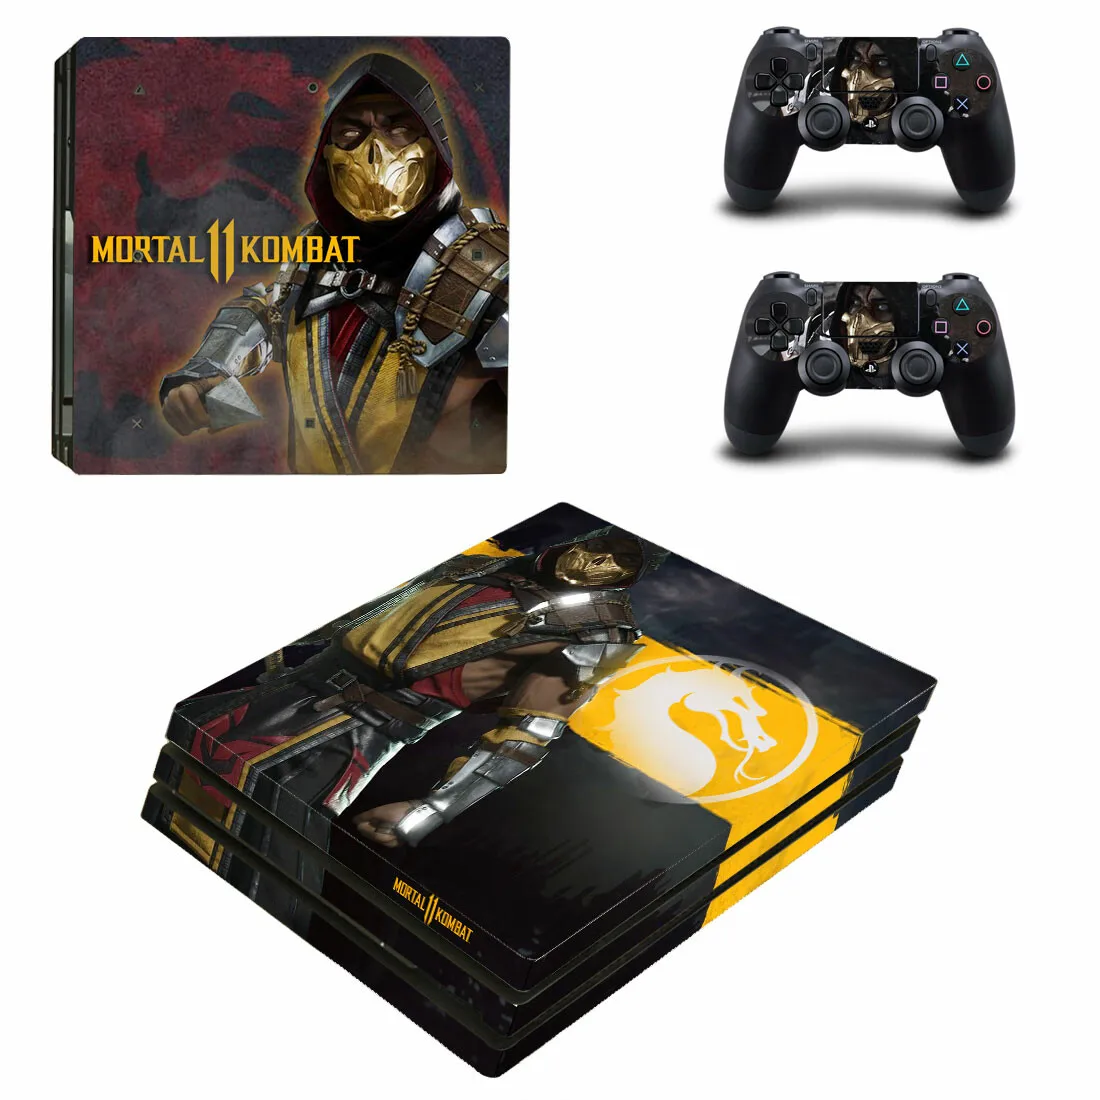 Mortal Kombat PS4 Pro Stickers Play station 4 Skin Sticker Decal For PlayStation 4 PS4 Pro Console & Controller Skins Vinyl images - 6